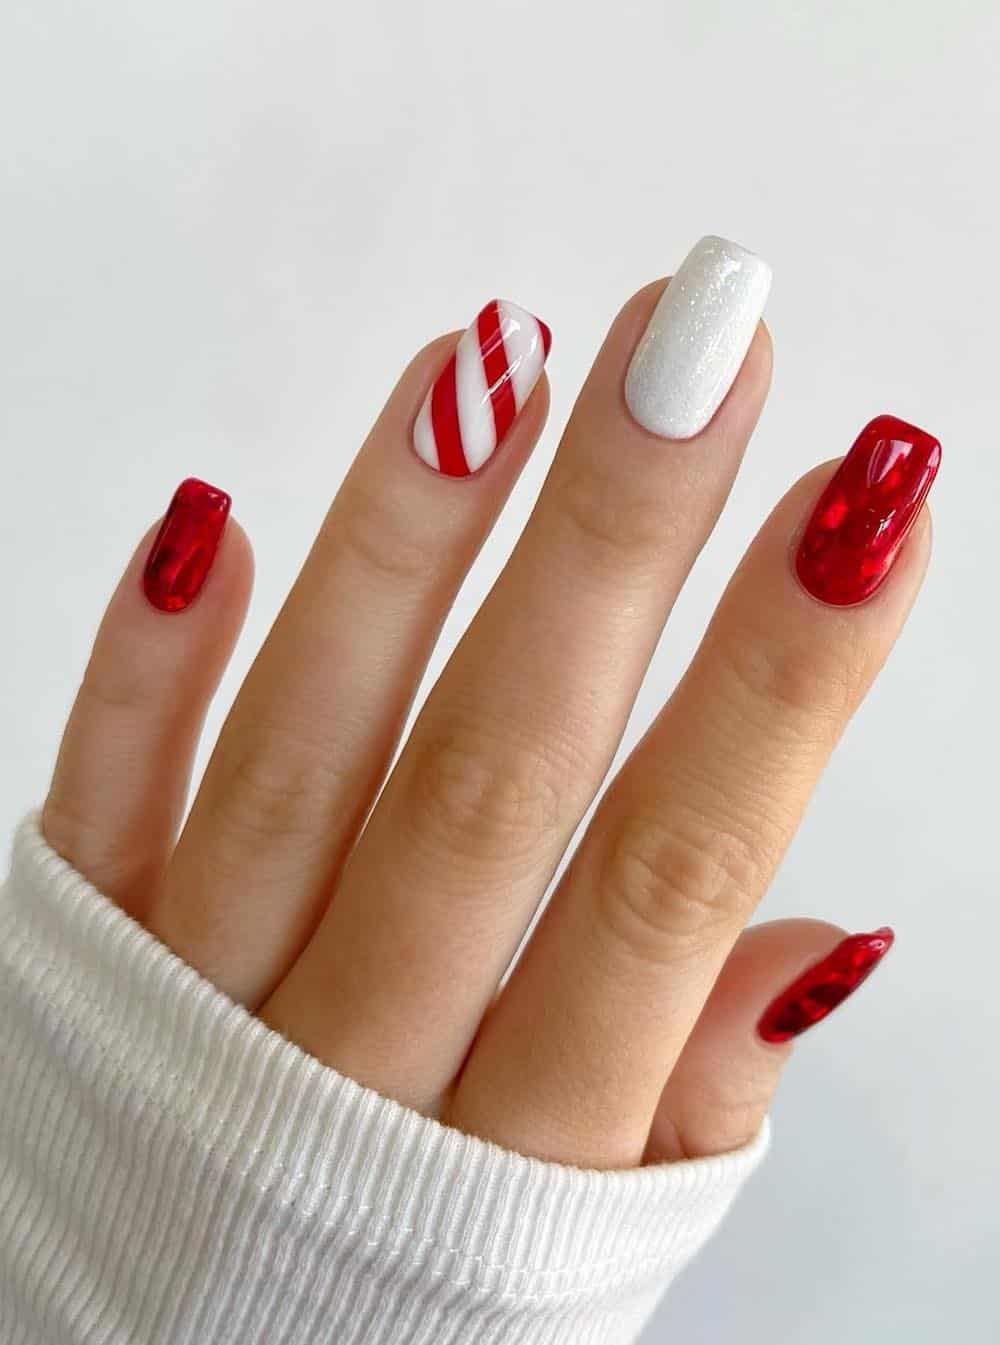 Classic red manicure with white glitter accent nails and red and white candy can details.